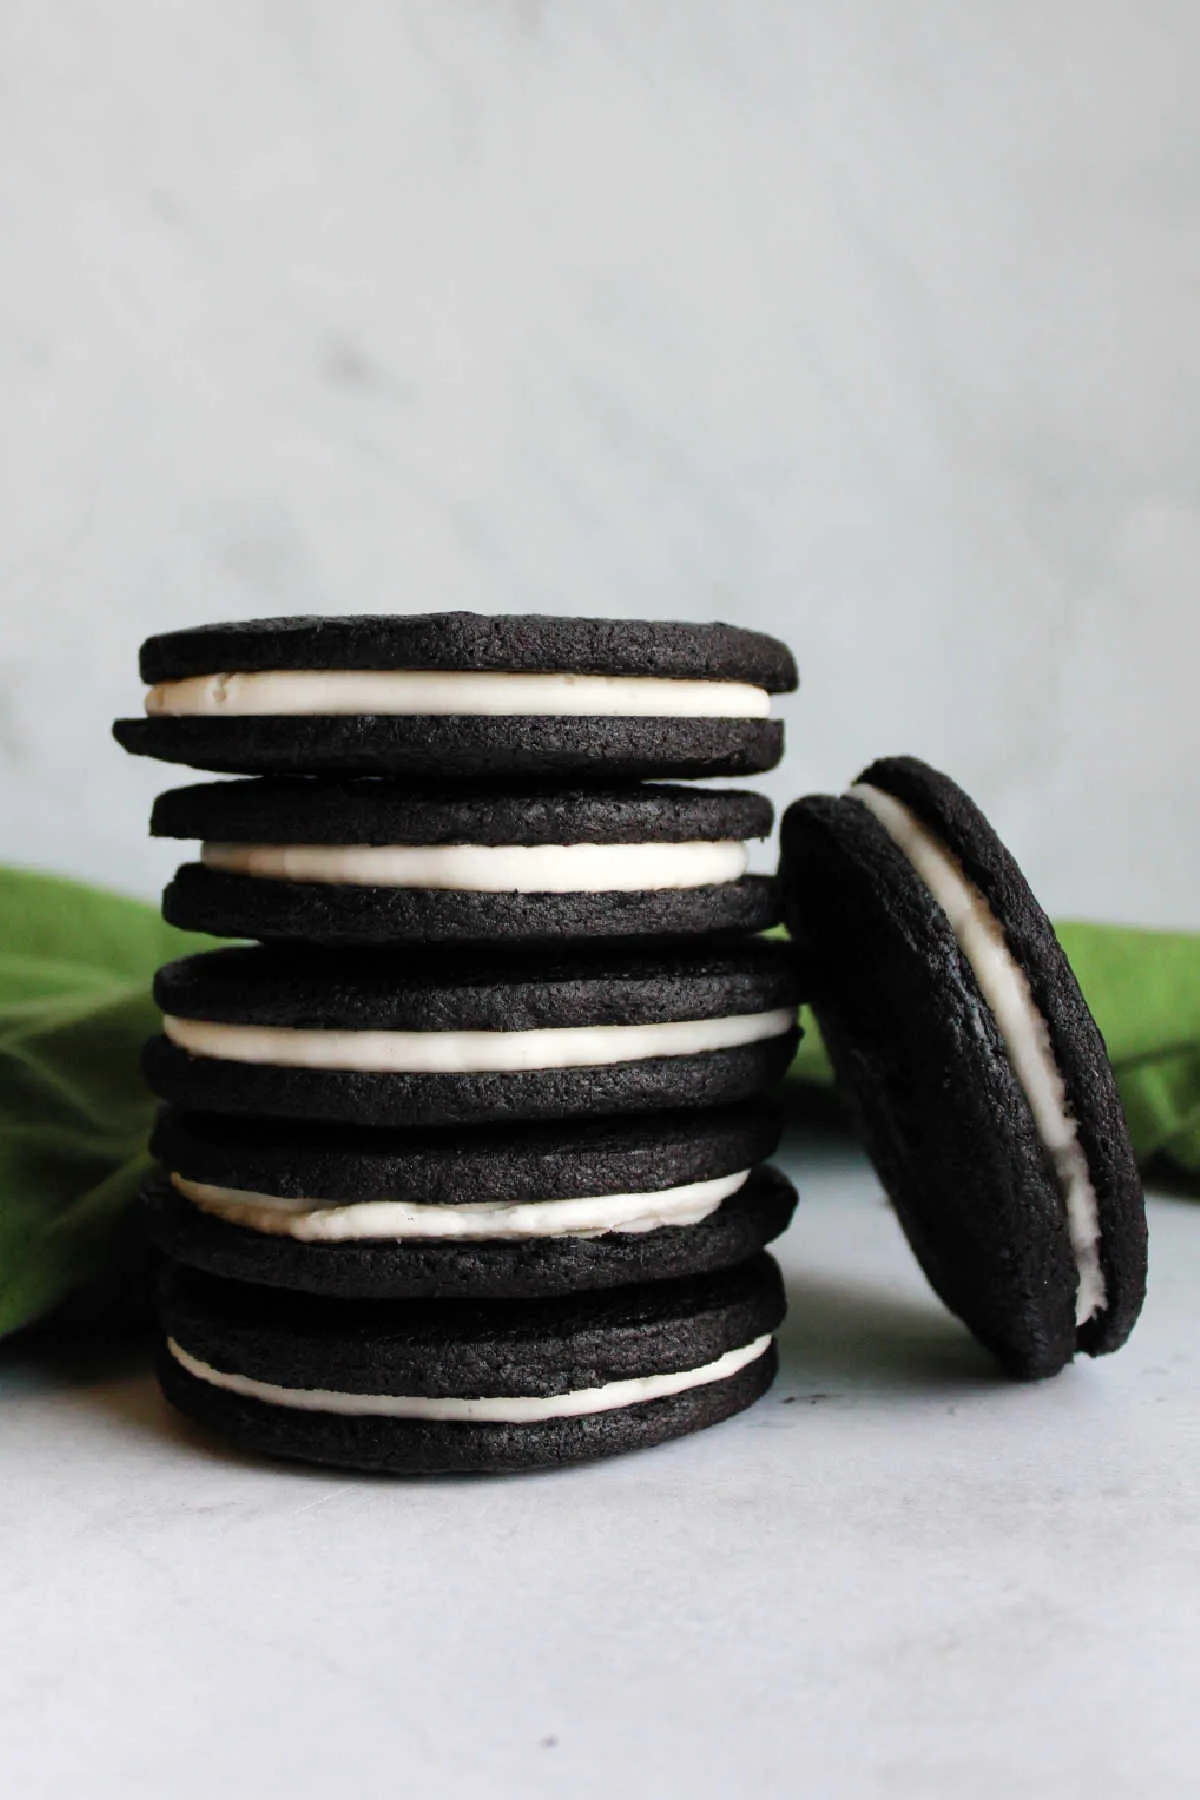 Stack of homemade oreos showing thin dark chocolate cookies and creamy white filling.